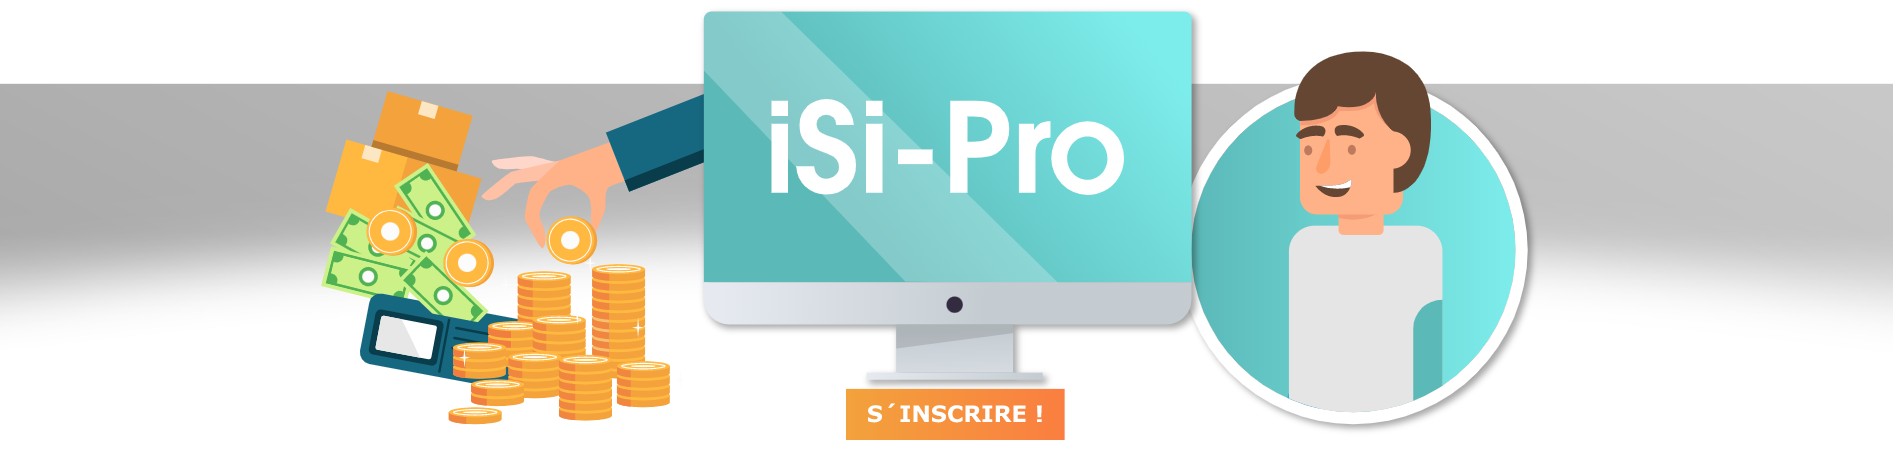 isi paiements image